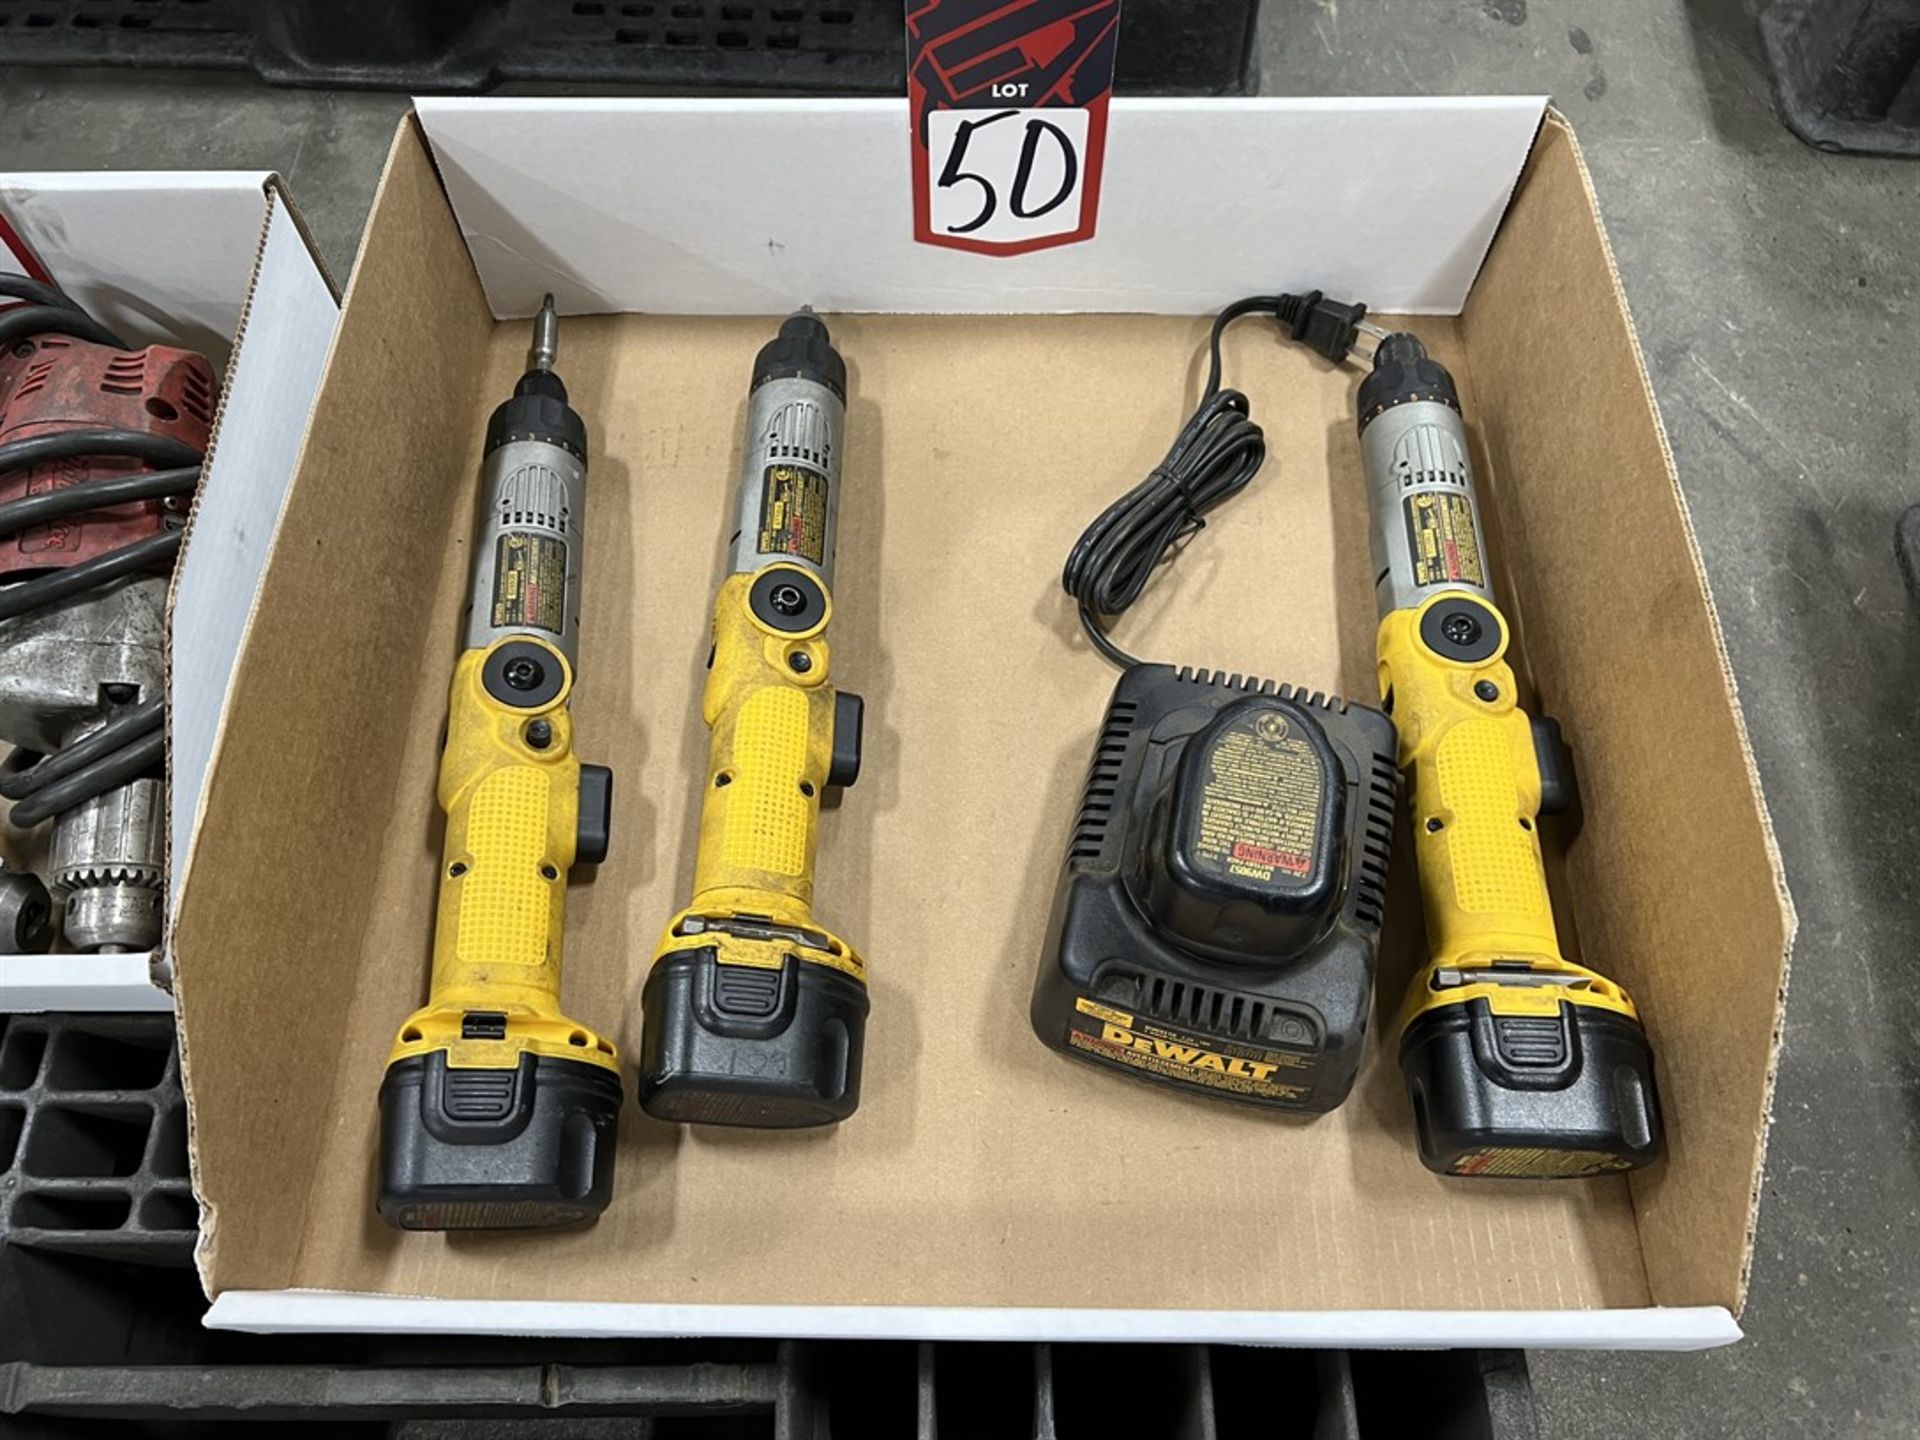 Lot of (3) DEWALT DW920 7.2V Heavy Duty Cordless Screw Drivers w/ Charger and Batteries